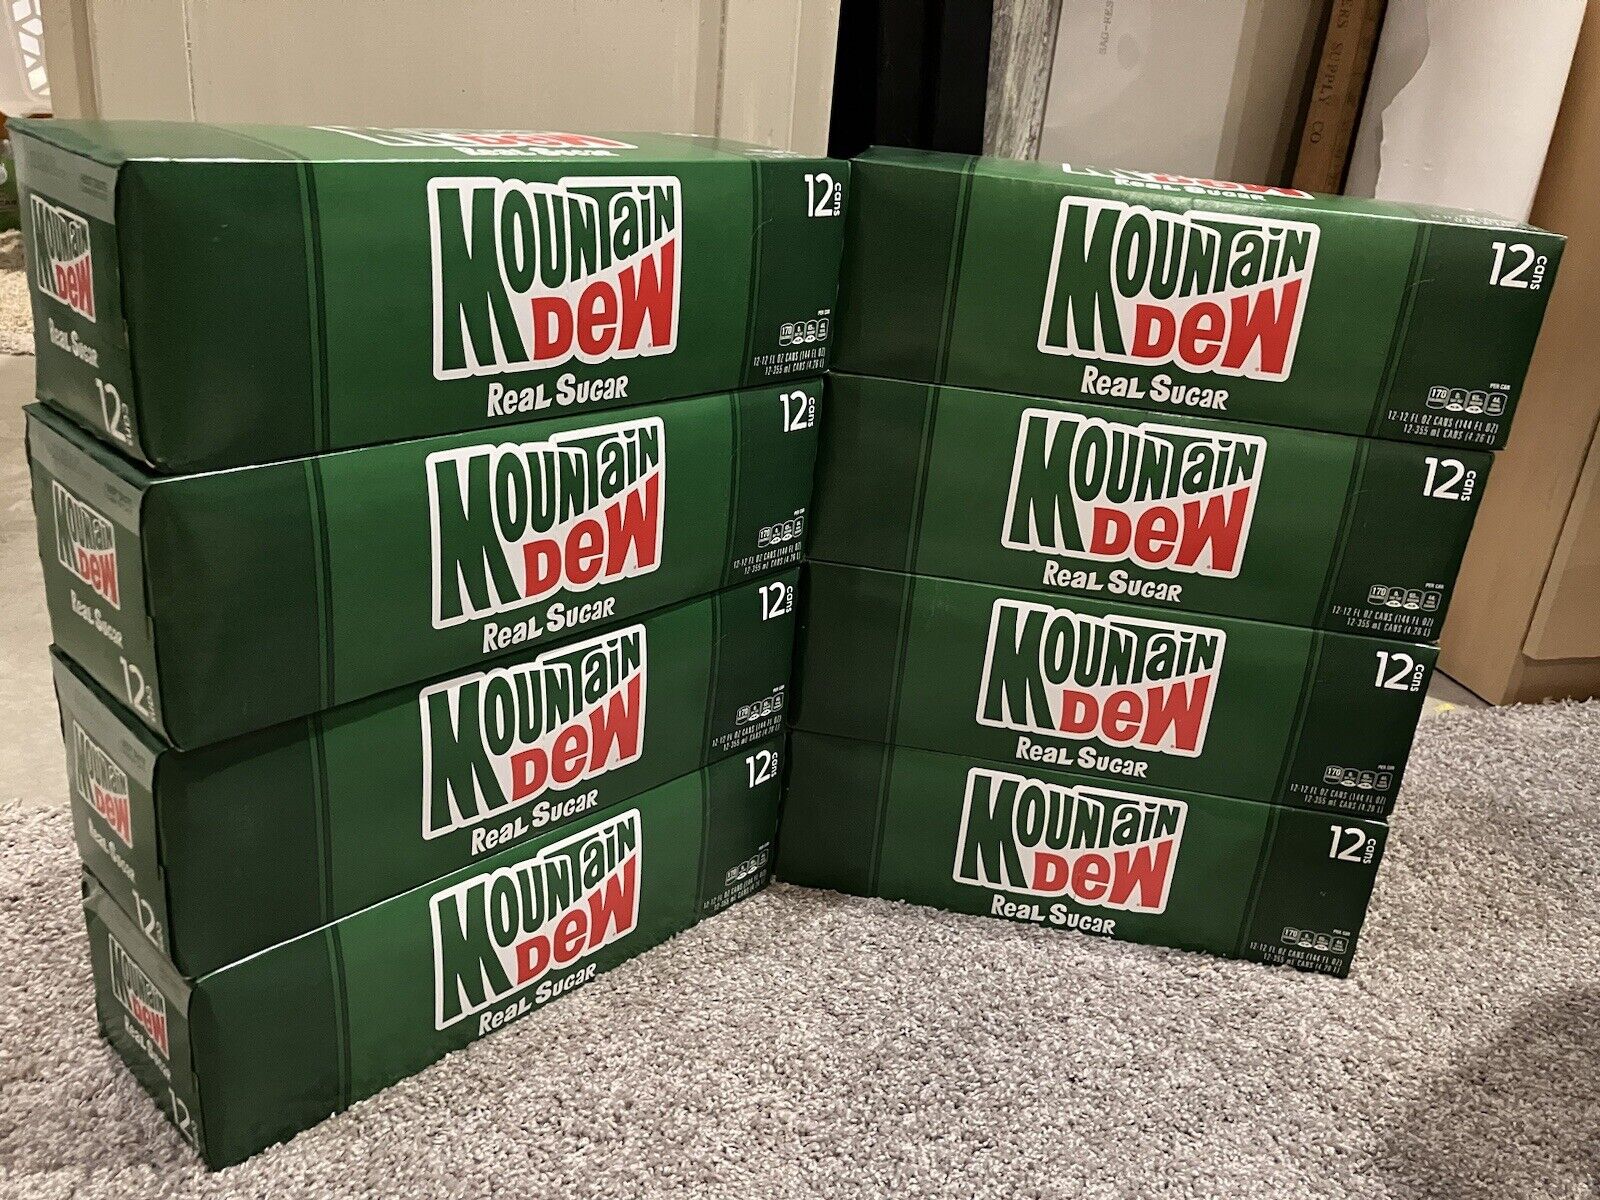 (8 PACK) MOUNTAIN DEW REAL SUGAR 12 PACK 96 CANS Best By 11/24 - 